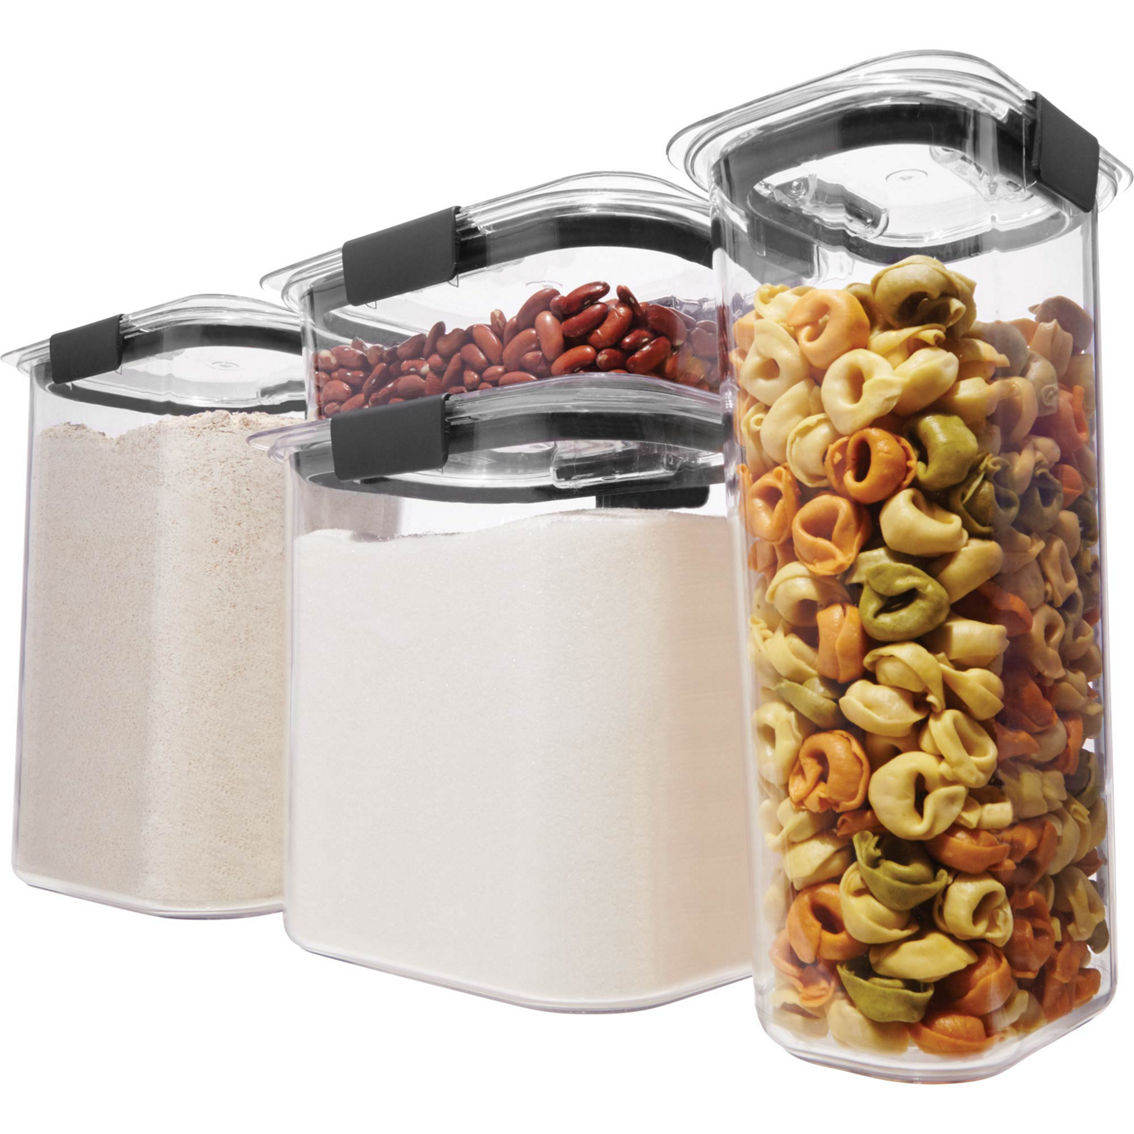 Rubbermaid Brilliance Pantry Container Set, Food Storage, Household